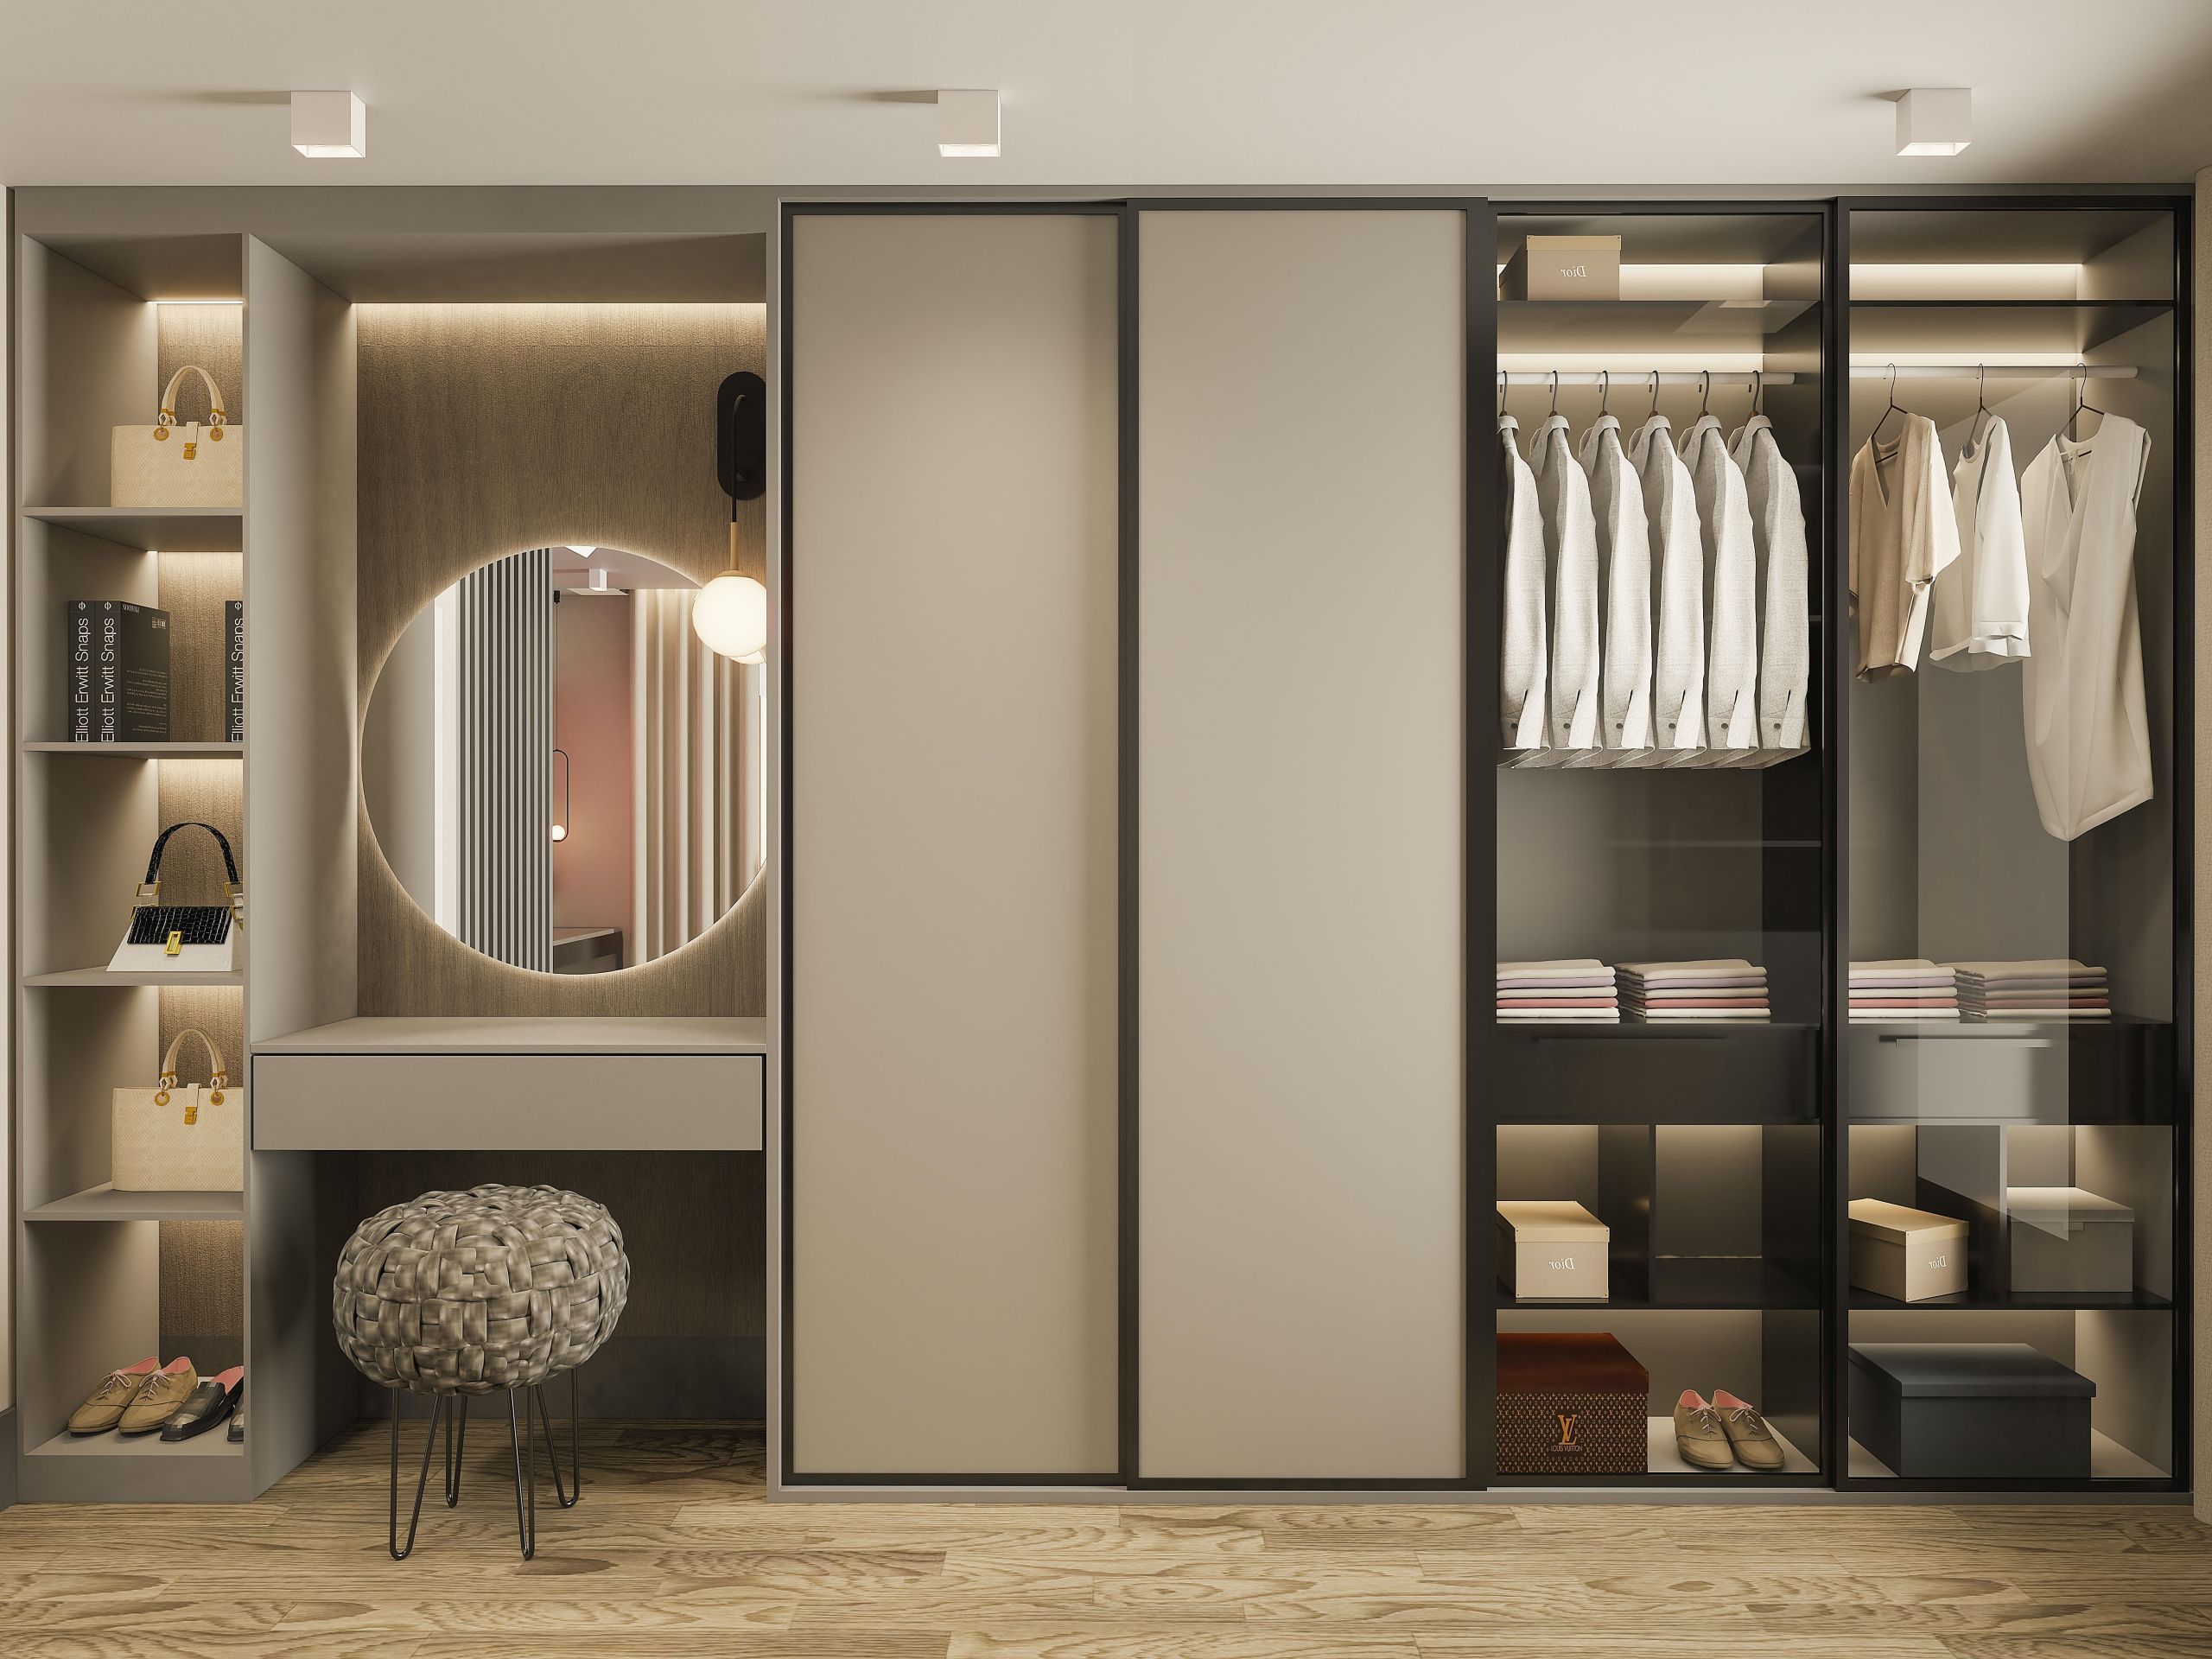 Master Bedroom Wardrobe Design With Dressing Table Pertaining To Wardrobes And Dressing Tables (View 19 of 22)